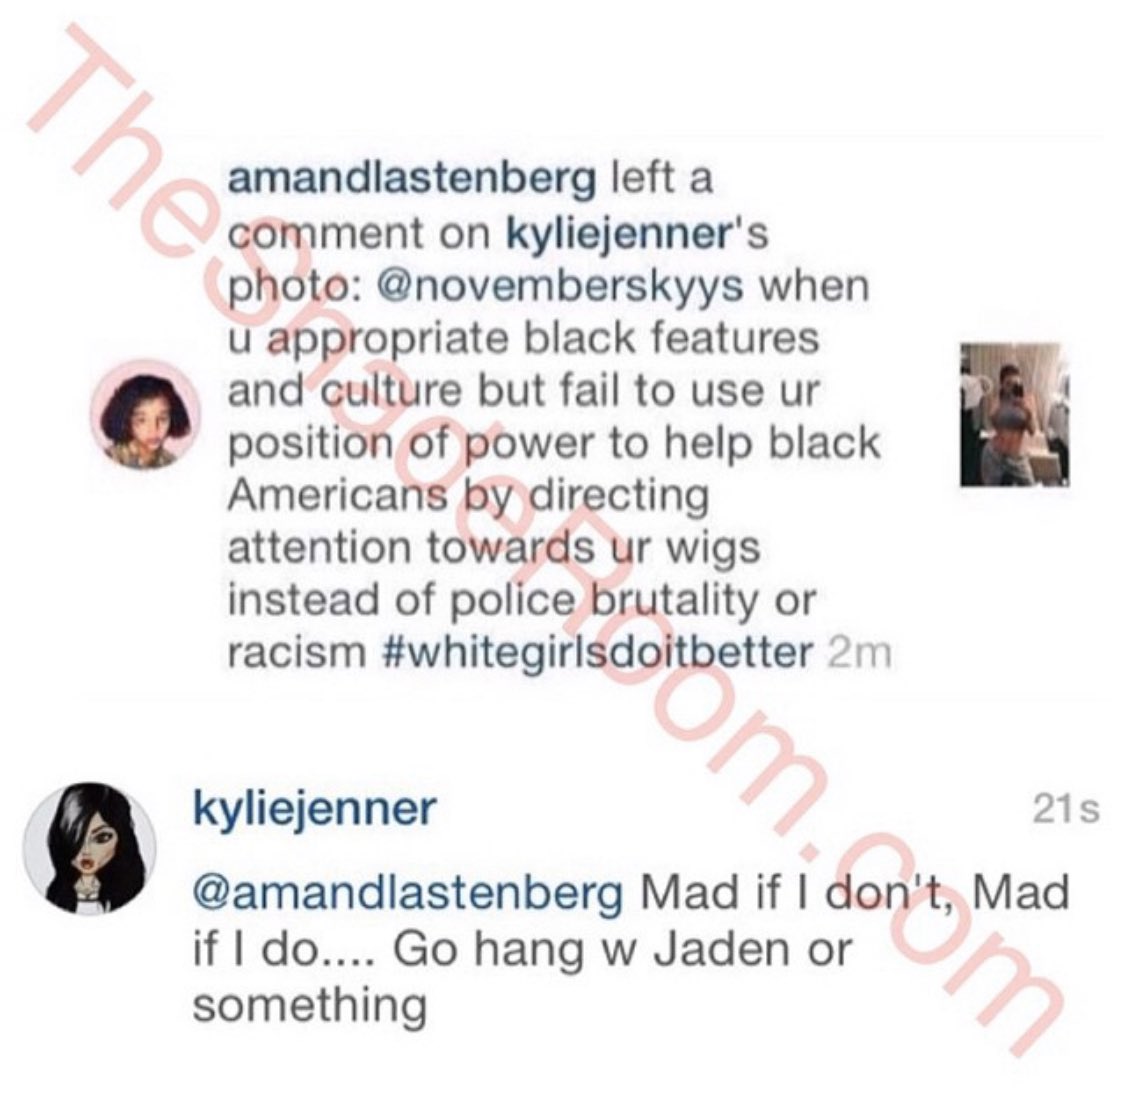 Her sister takes after Candle when it comes to being called out on being racially insensitive. Exhibit B your honor, Kylie being called out by Amanda Stenberg then proceeding to shade her for absolutely no reason rather than apologizing